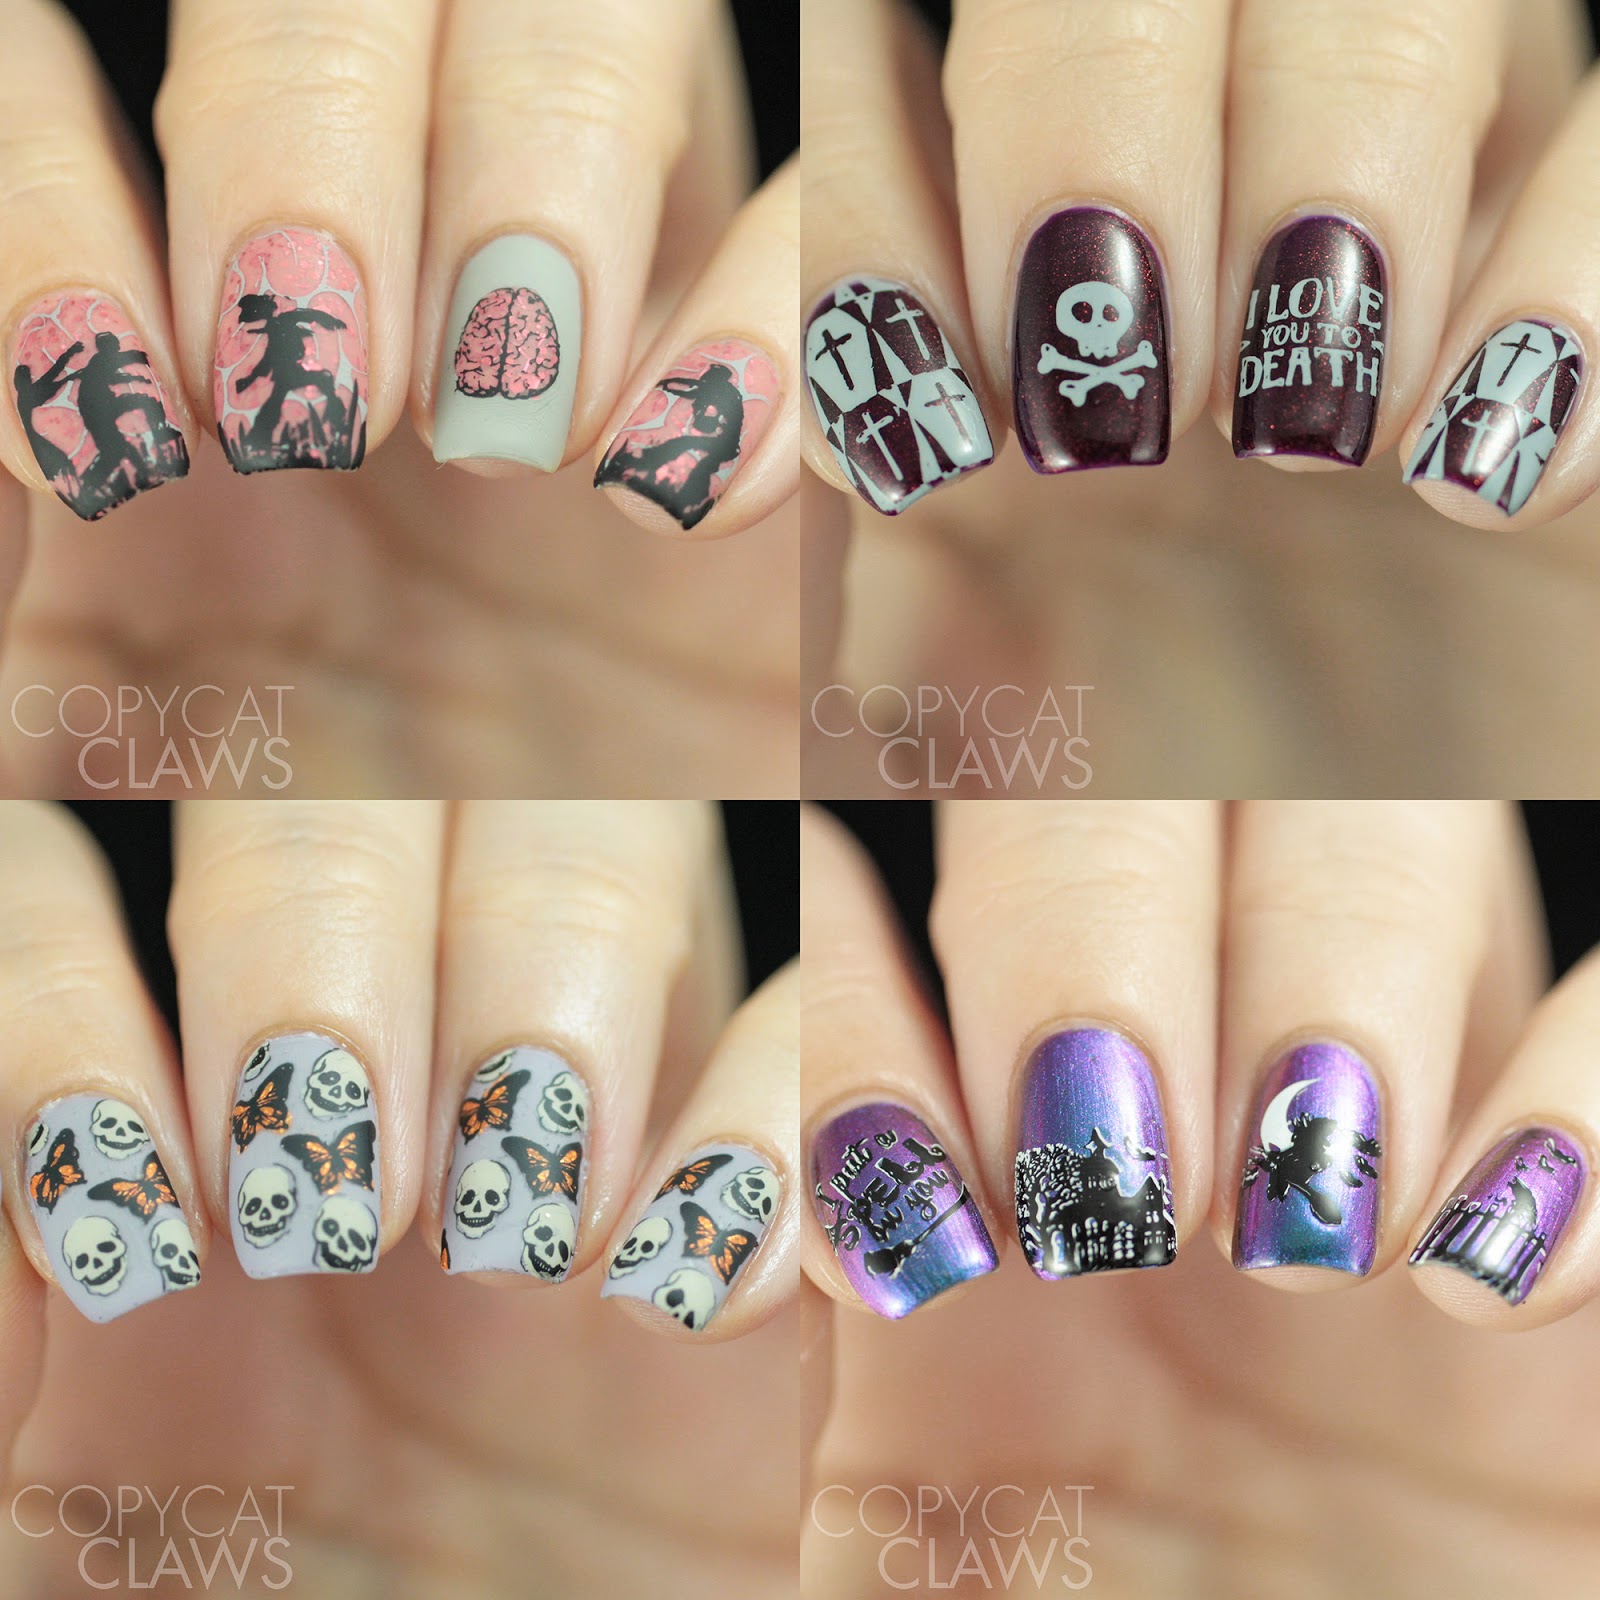 Copycat Claws: Lina Nail Art Supplies Spooklicious 01 and 02 Review